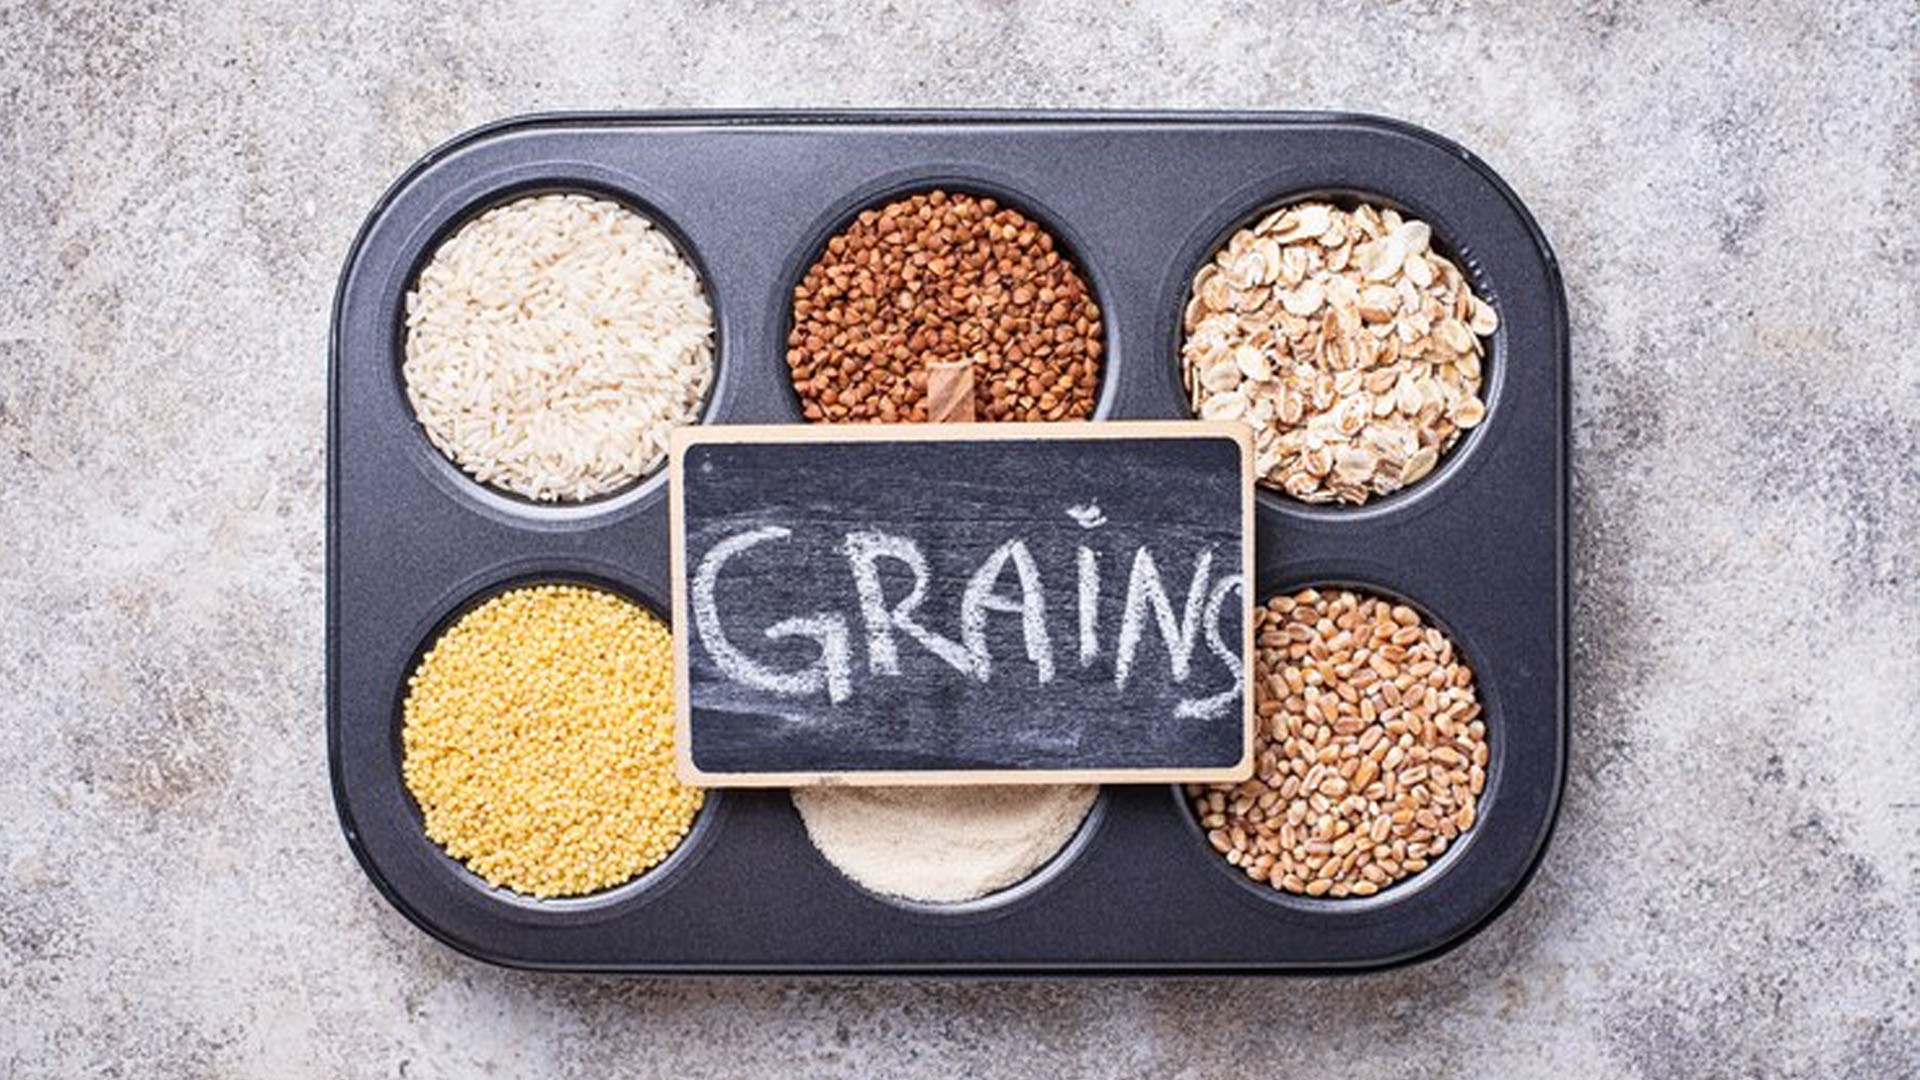 Wholegrains: Types, Benefits and Nutrition